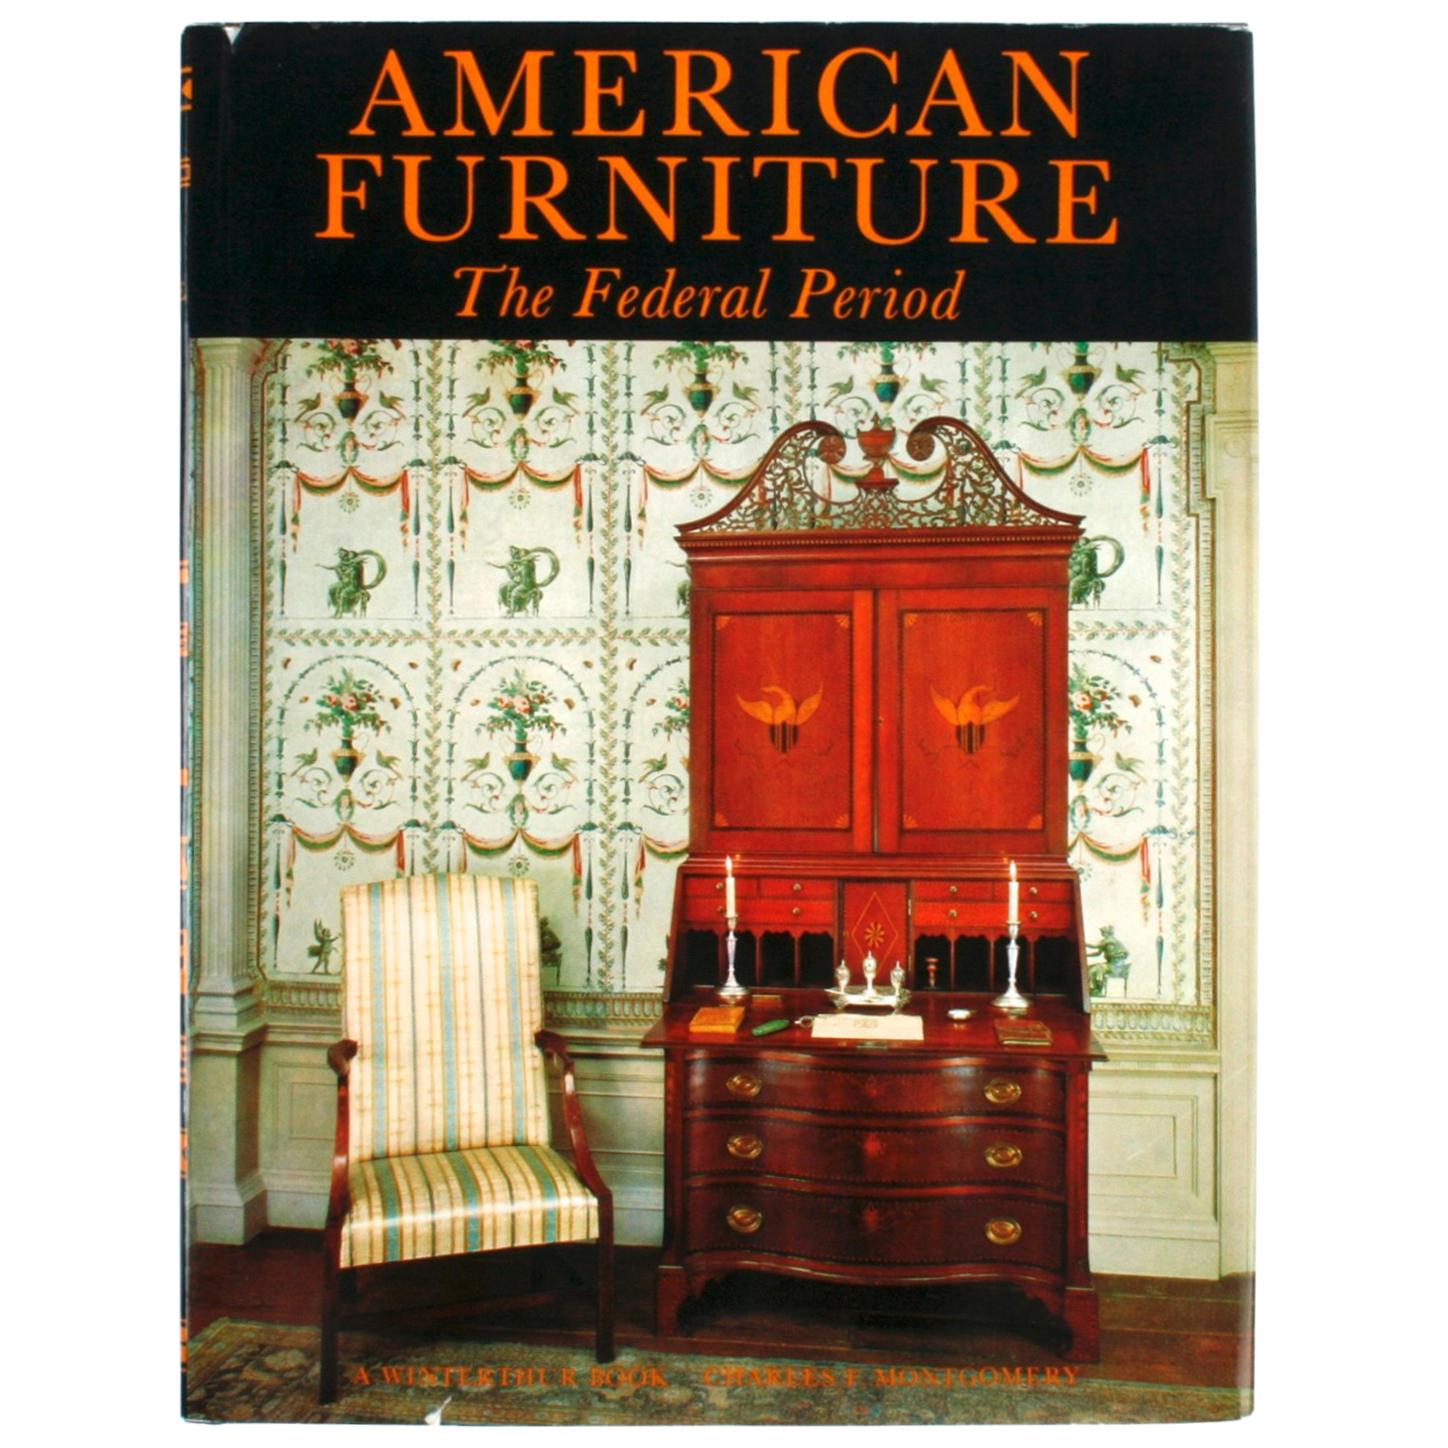 American Furniture, The Federal Period by Charles F. Montgomery For Sale